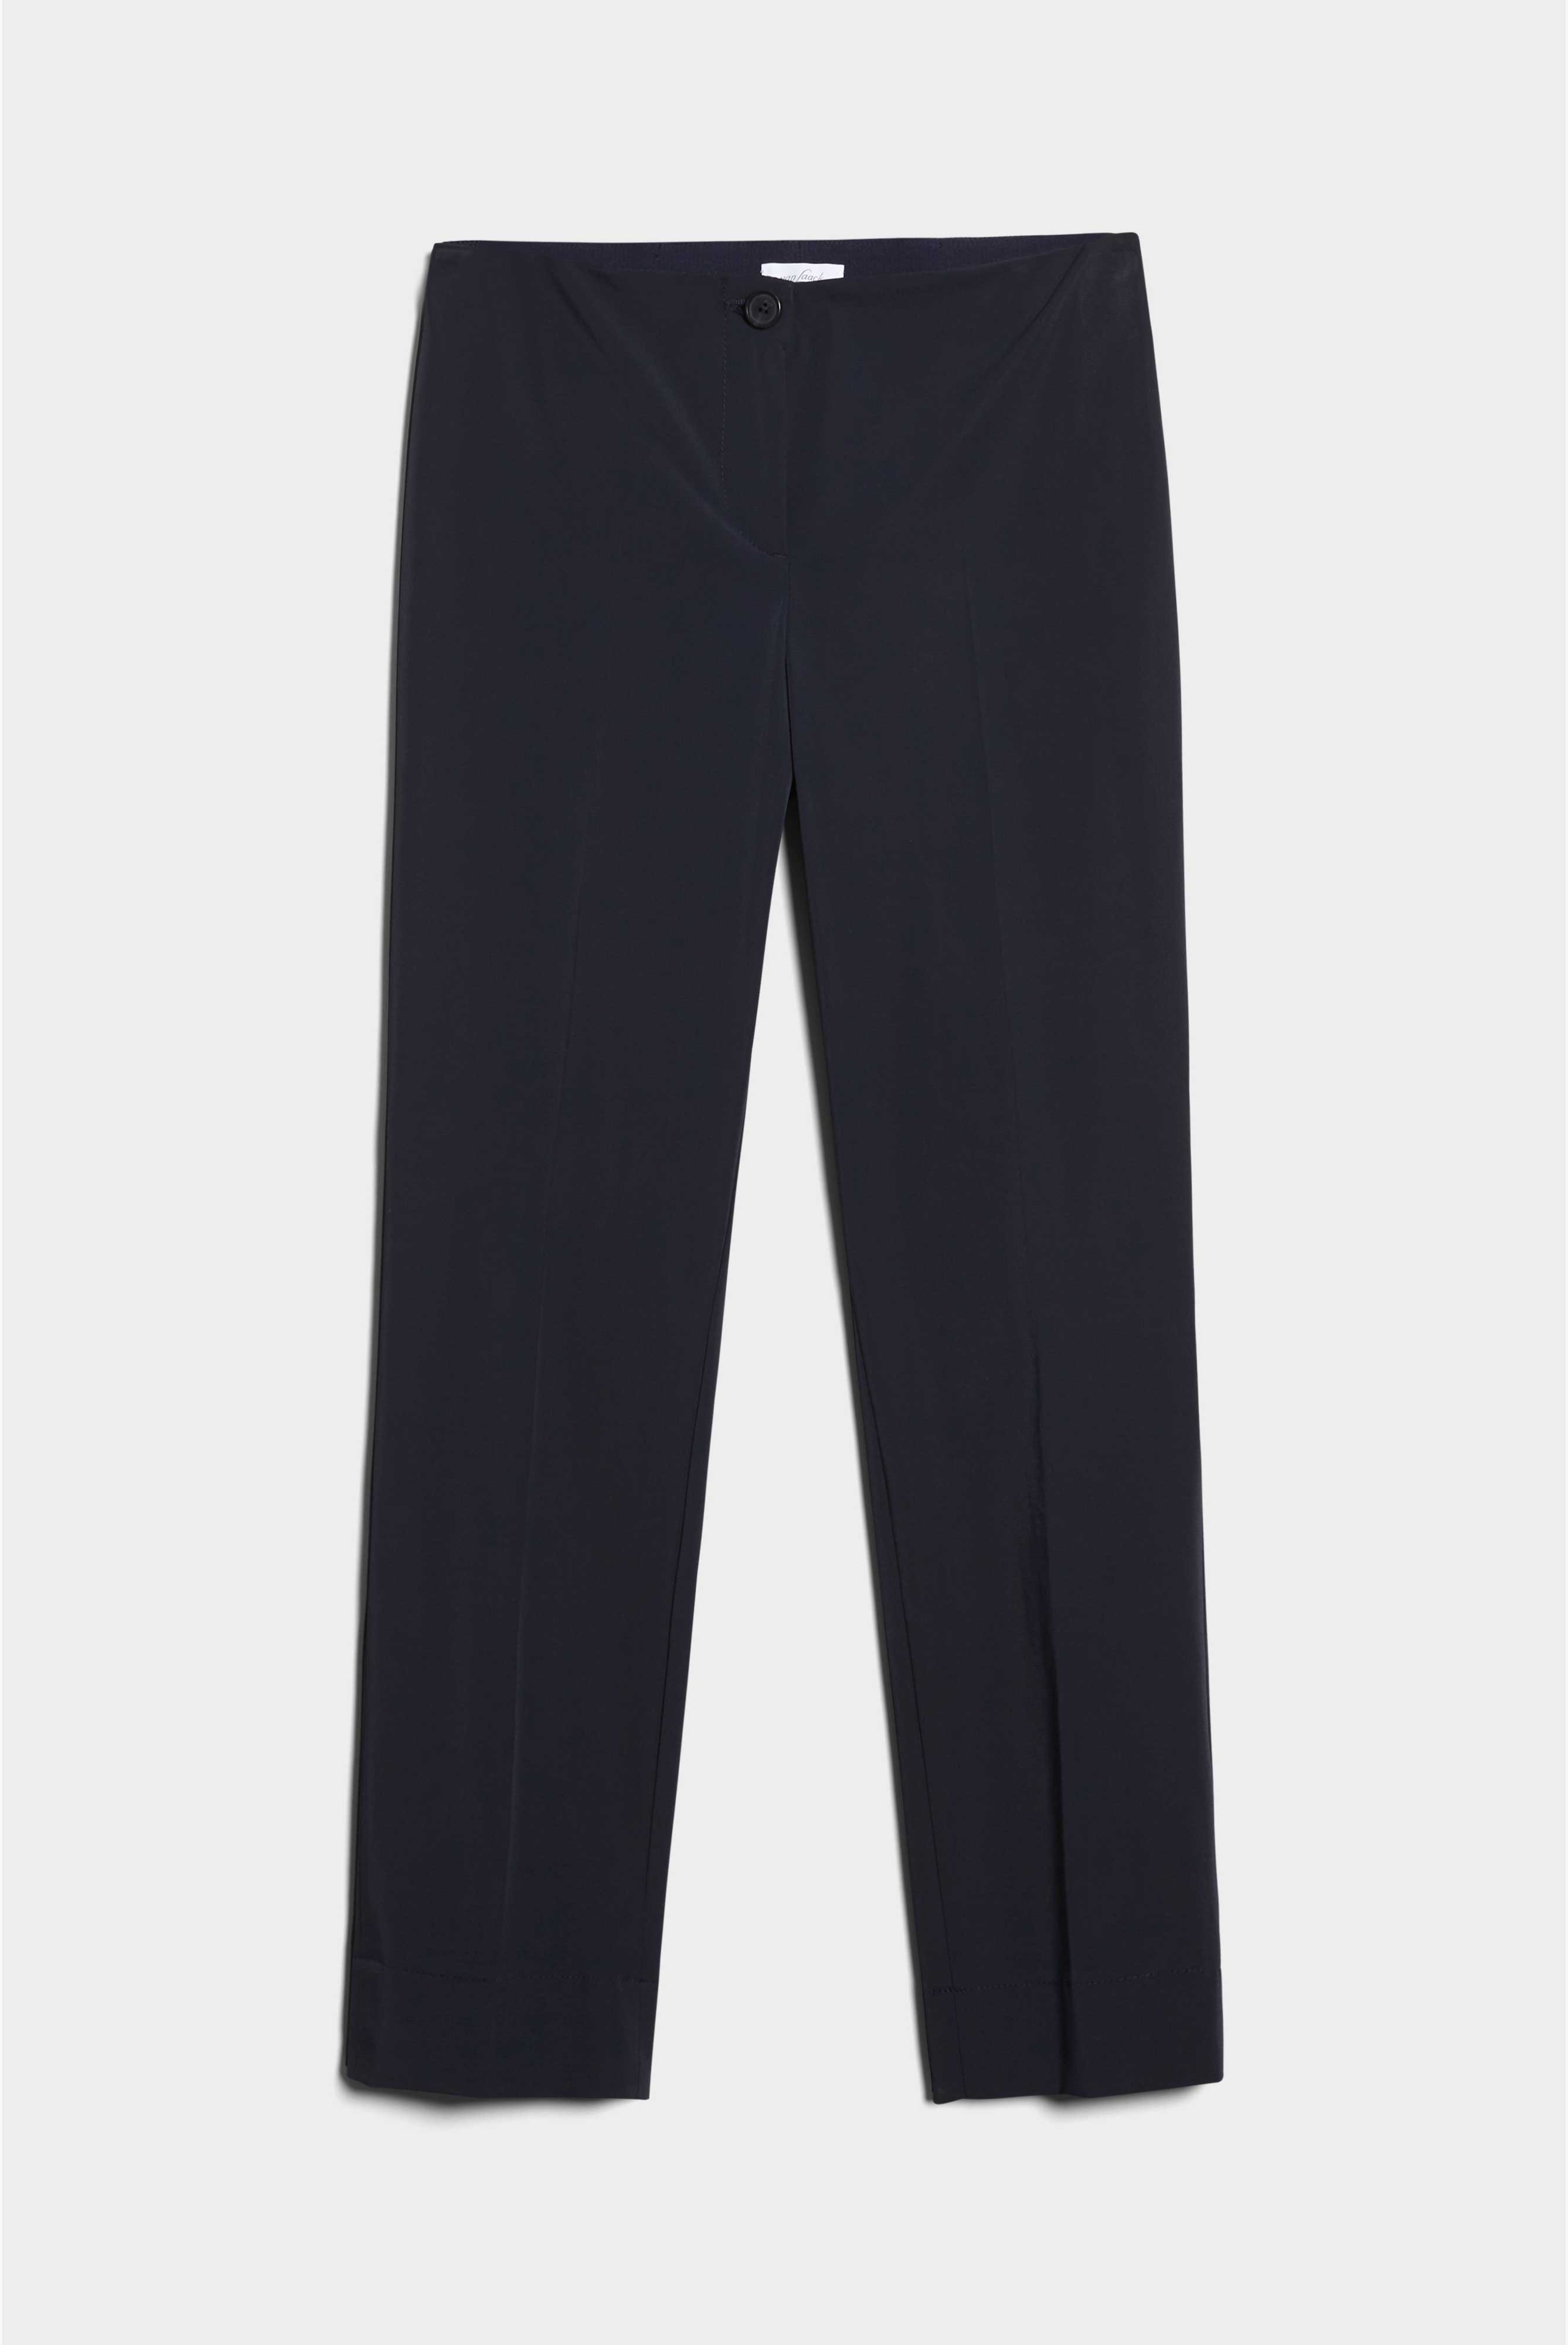 Jeans & Trousers+Business trousers with stretch+04.635K..J00144.790.34